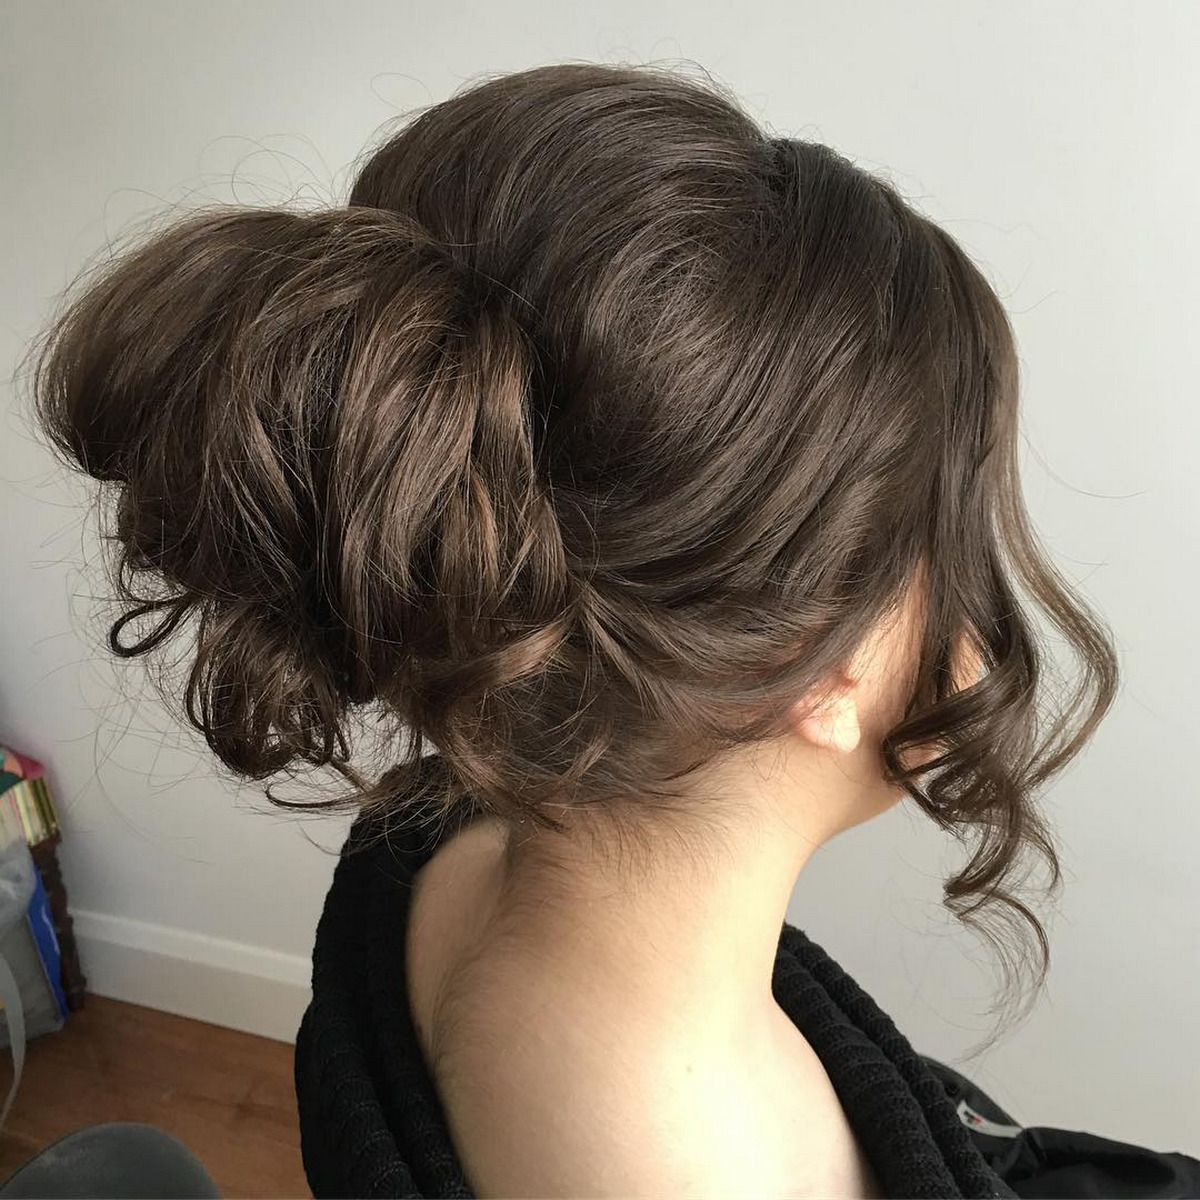 Loose Bun With Curled Fringe